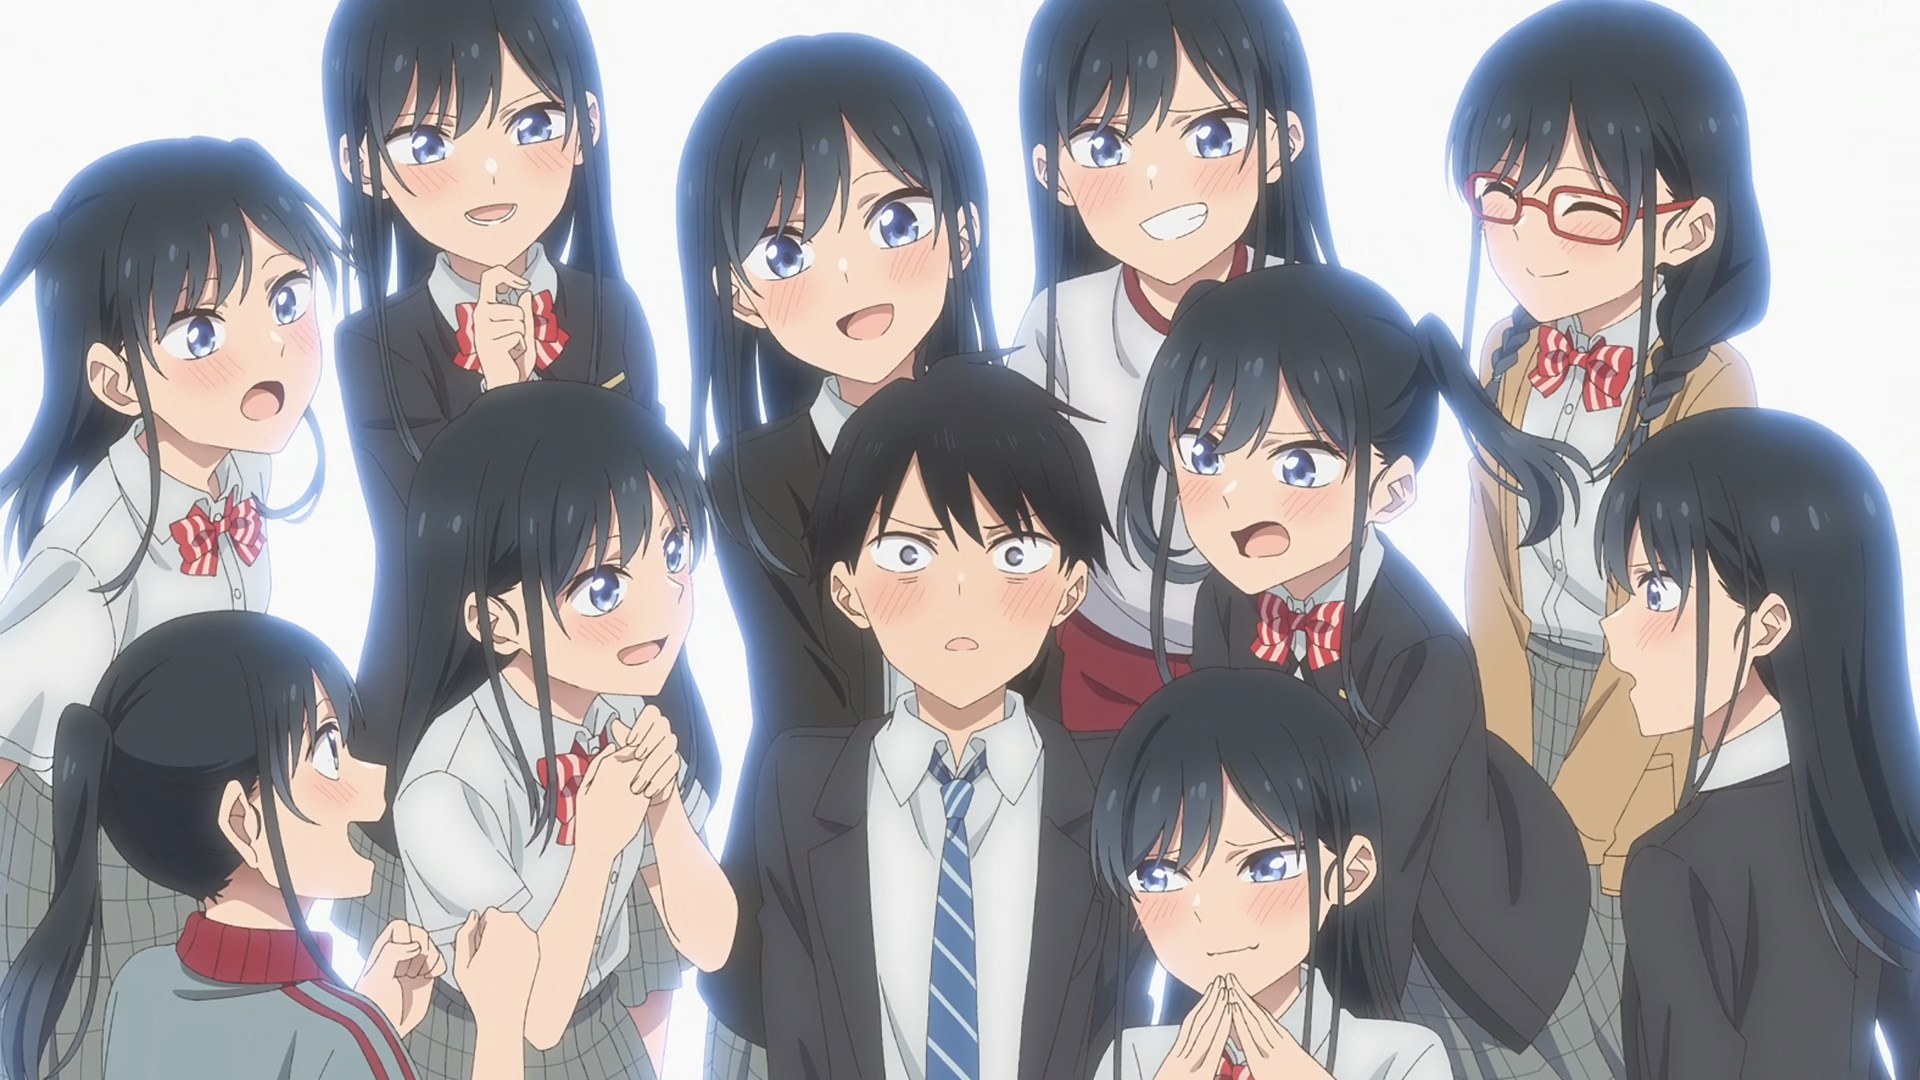 Rin in all her personas surrounding a flustered looking Eiji